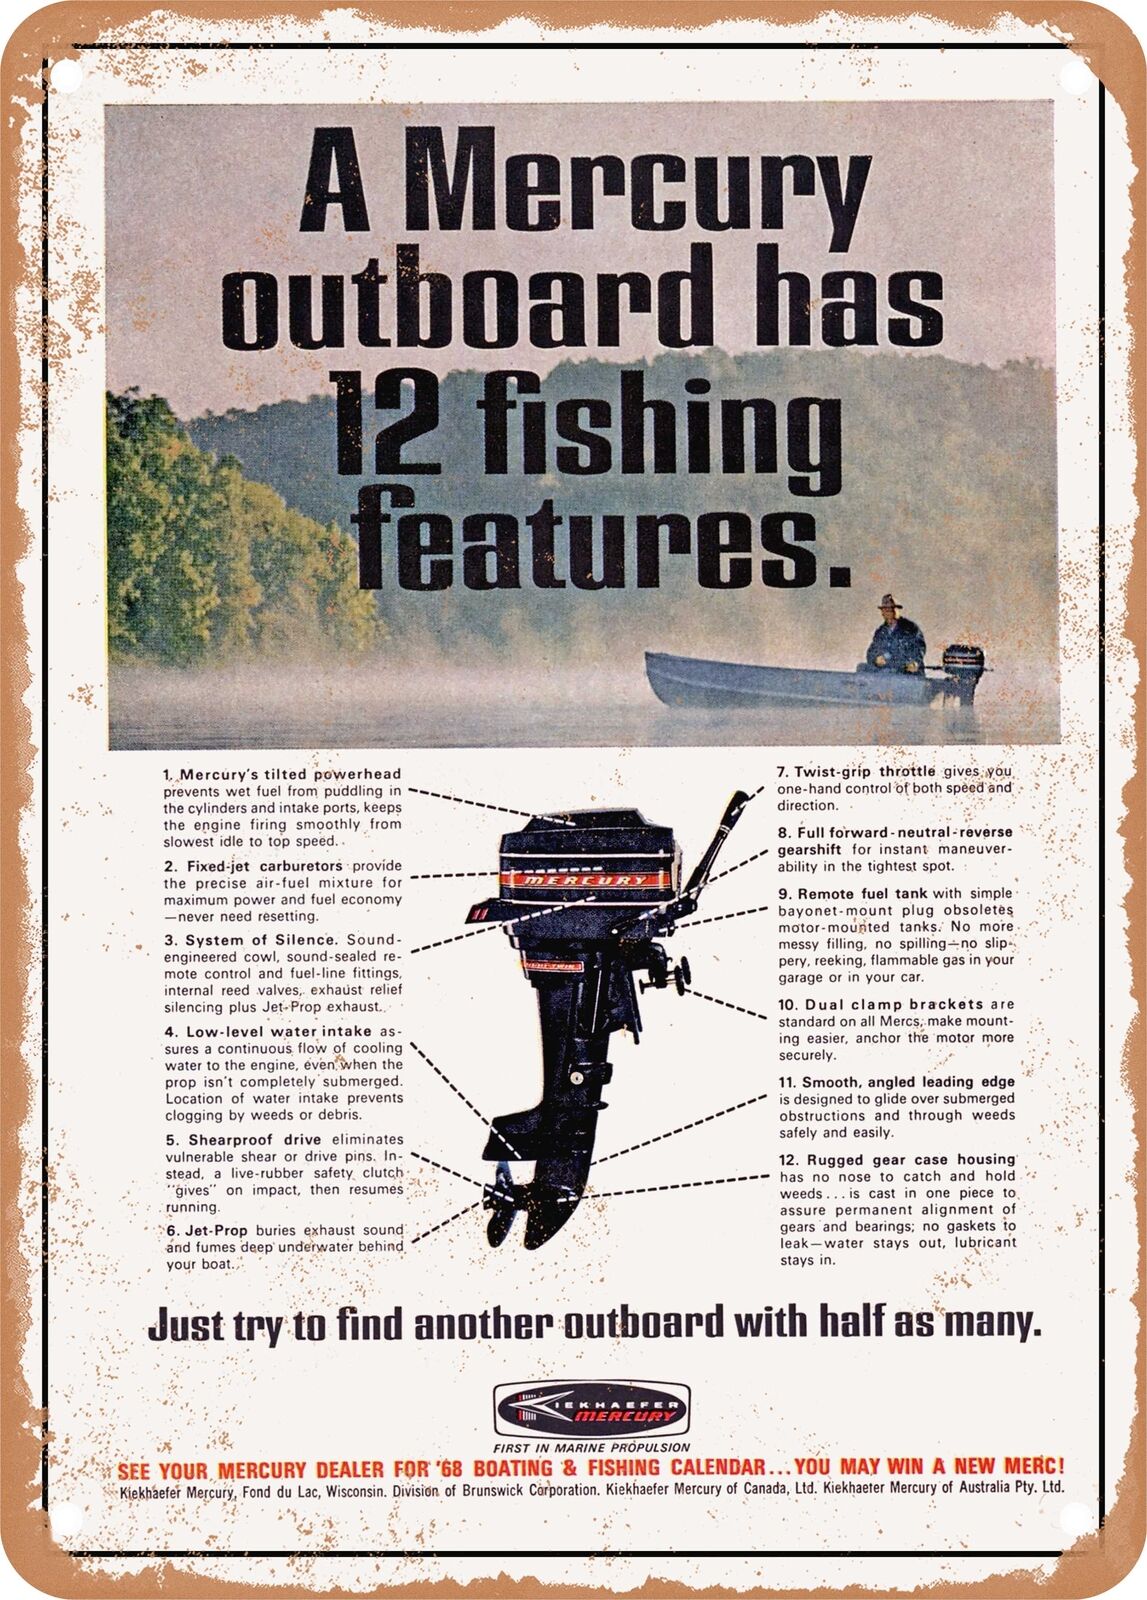 METAL SIGN - 1968 A Mercury Outboard Has 12 Fishing Features Vintage Ad